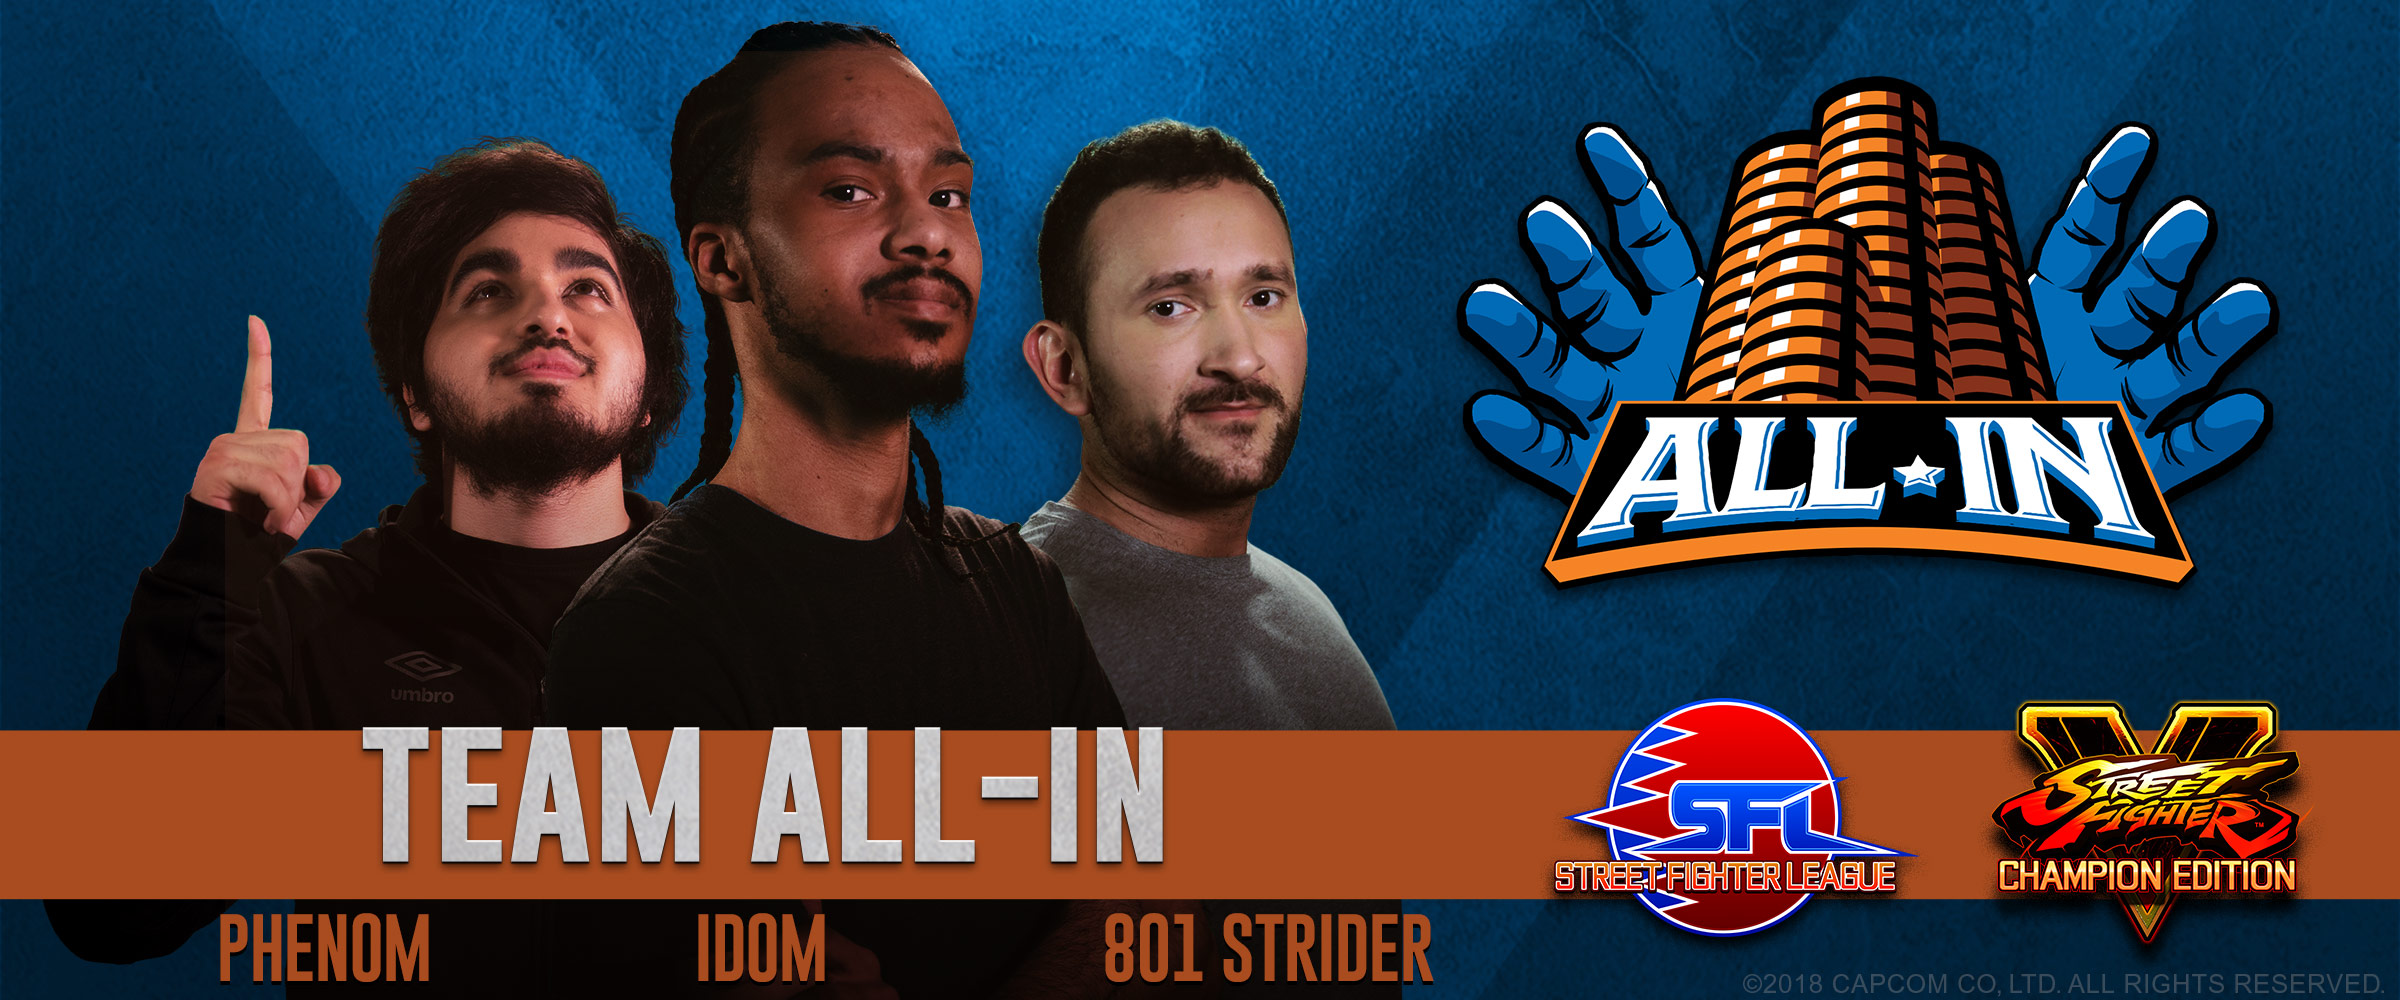 Introducing Team All-In